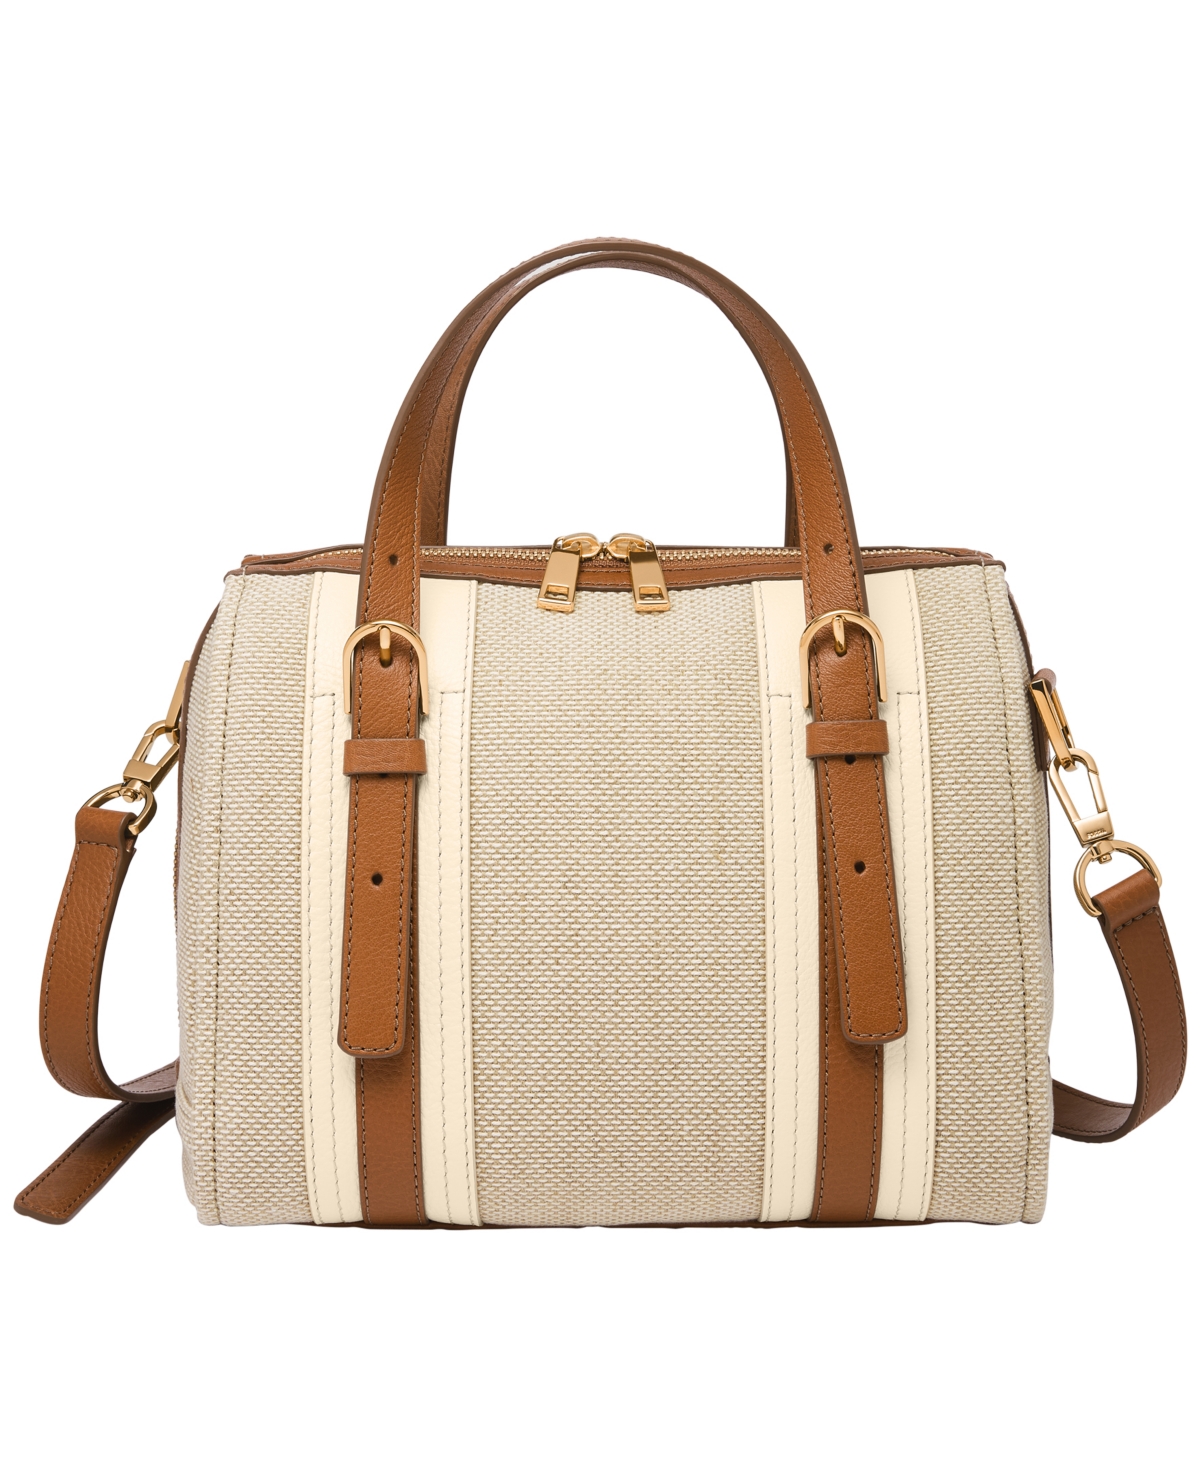 Fossil Carlie Small Satchel Bag In Natural Brown